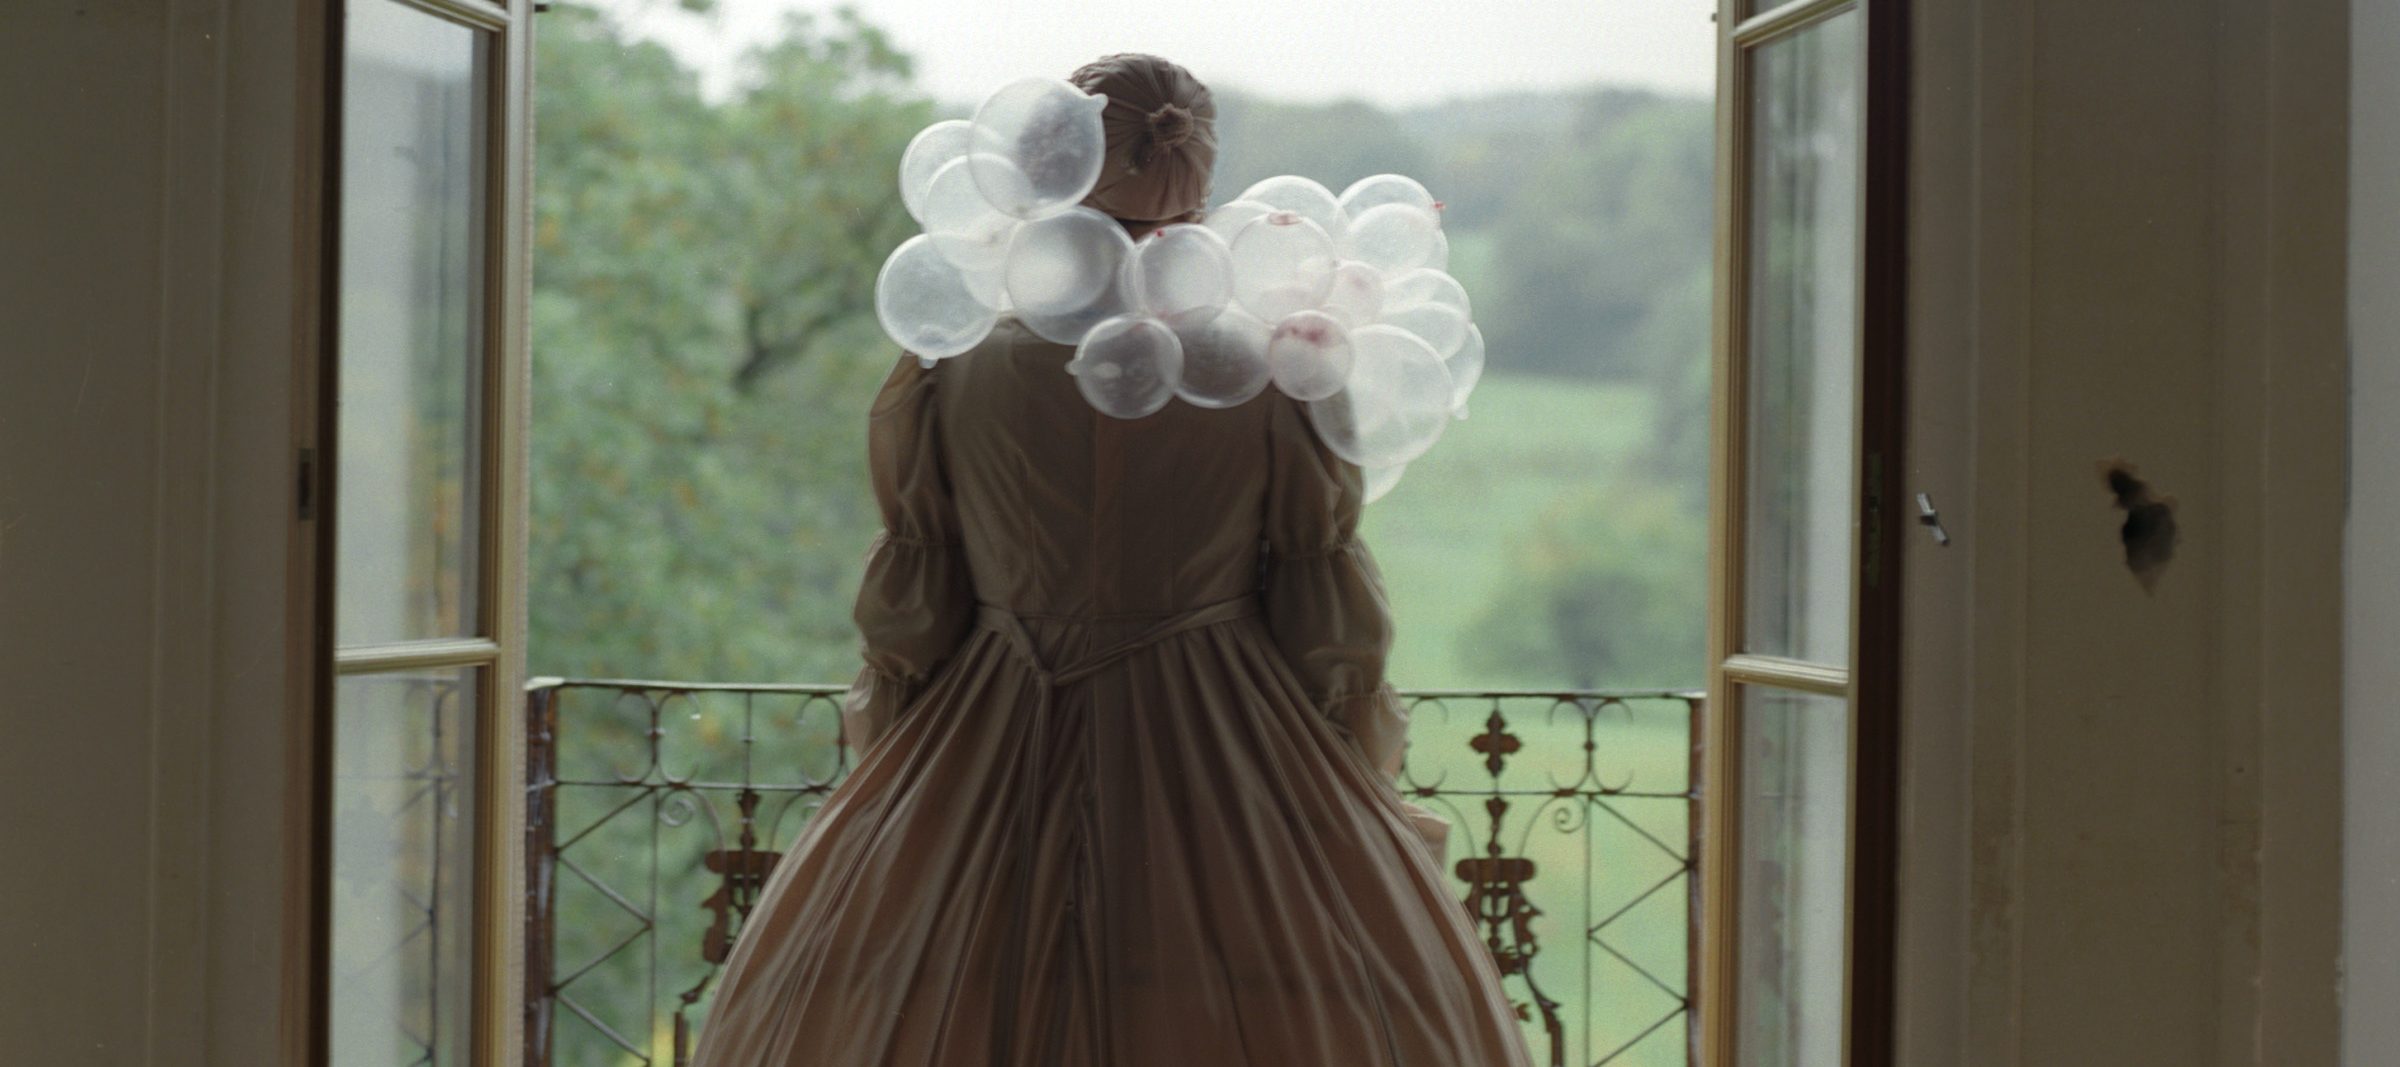 An adult woman seen from behind standing before two open glass doors leading out to a balcony overlooking greenery. She is dressed in a long, tan, period gown and her hair is tied up. Around her shoulders are several clear bubbles, resembling a scarf made of bubbles.